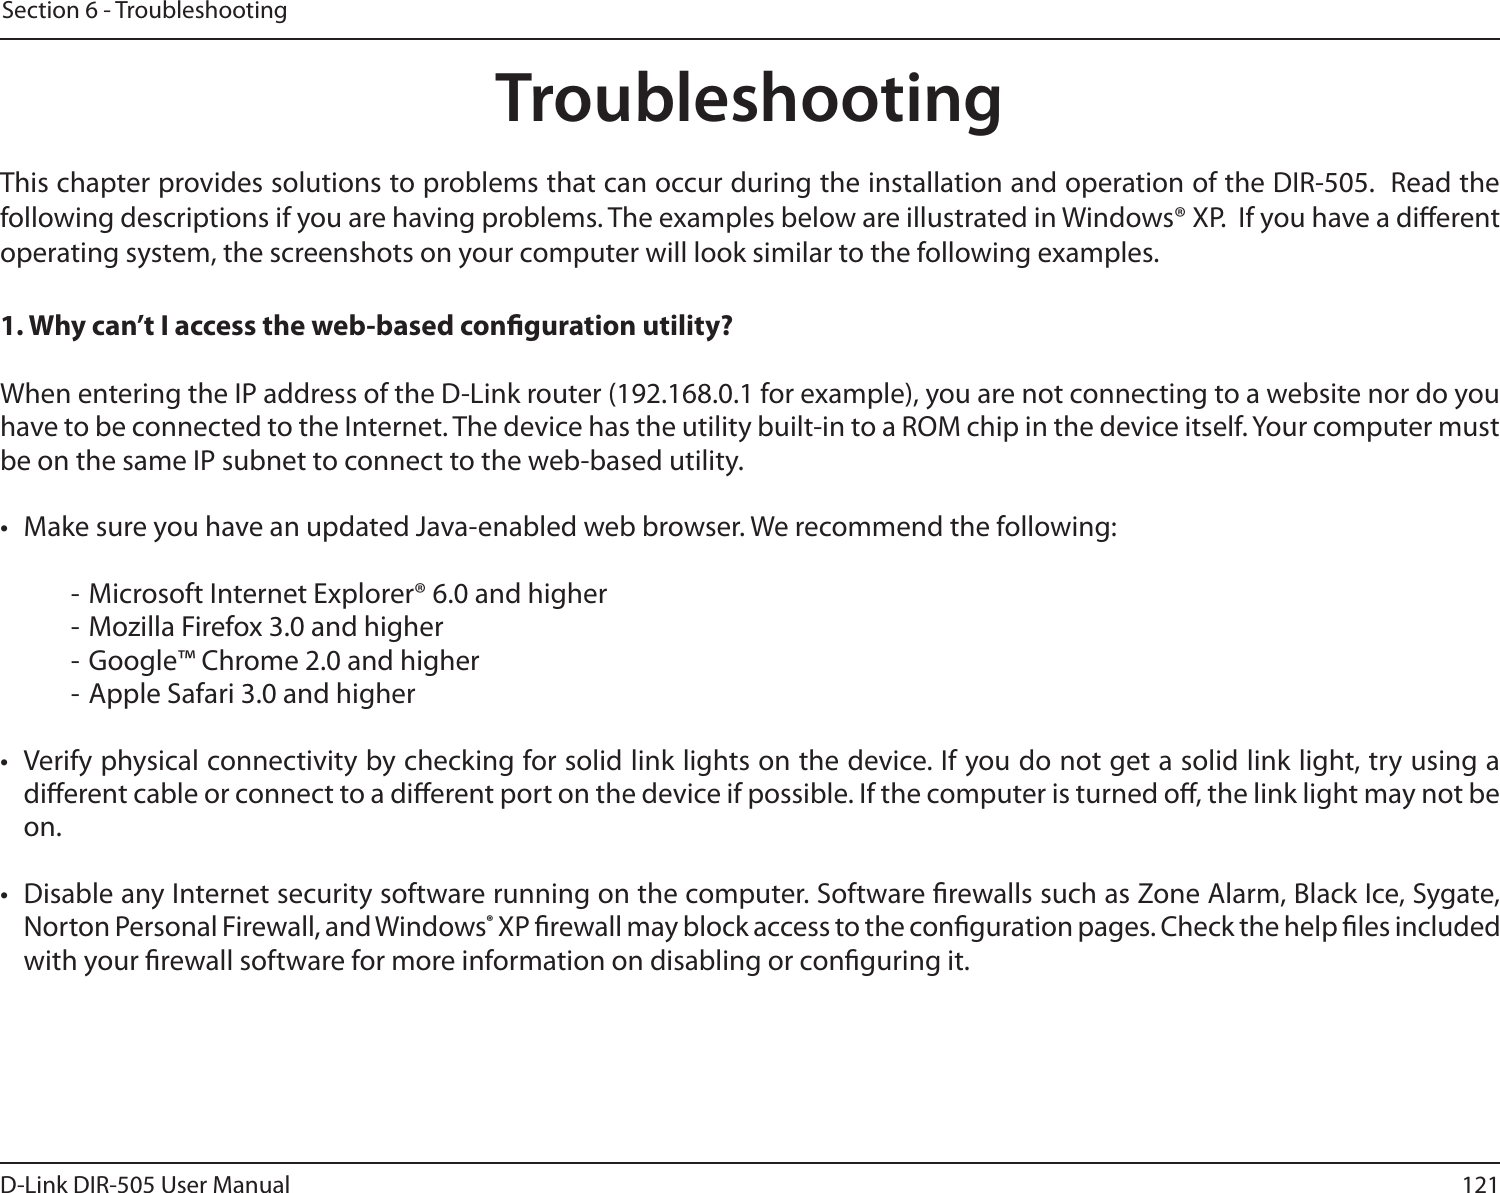 121D-Link DIR-505 User ManualSection 6 - TroubleshootingTroubleshootingThis chapter provides solutions to problems that can occur during the installation and operation of the DIR-505.  Read the following descriptions if you are having problems. The examples below are illustrated in Windows® XP.  If you have a dierent operating system, the screenshots on your computer will look similar to the following examples.1. Why can’t I access the web-based conguration utility?When entering the IP address of the D-Link router (192.168.0.1 for example), you are not connecting to a website nor do you have to be connected to the Internet. The device has the utility built-in to a ROM chip in the device itself. Your computer must be on the same IP subnet to connect to the web-based utility. •  Make sure you have an updated Java-enabled web browser. We recommend the following:  - Microsoft Internet Explorer® 6.0 and higher- Mozilla Firefox 3.0 and higher- Google™ Chrome 2.0 and higher- Apple Safari 3.0 and higher•  Verify physical connectivity by checking for solid link lights on the device. If you do not get a solid link light, try using a dierent cable or connect to a dierent port on the device if possible. If the computer is turned o, the link light may not be on.•  Disable any Internet security software running on the computer. Software rewalls such as Zone Alarm, Black Ice, Sygate, Norton Personal Firewall, and Windows® XP rewall may block access to the conguration pages. Check the help les included with your rewall software for more information on disabling or conguring it.